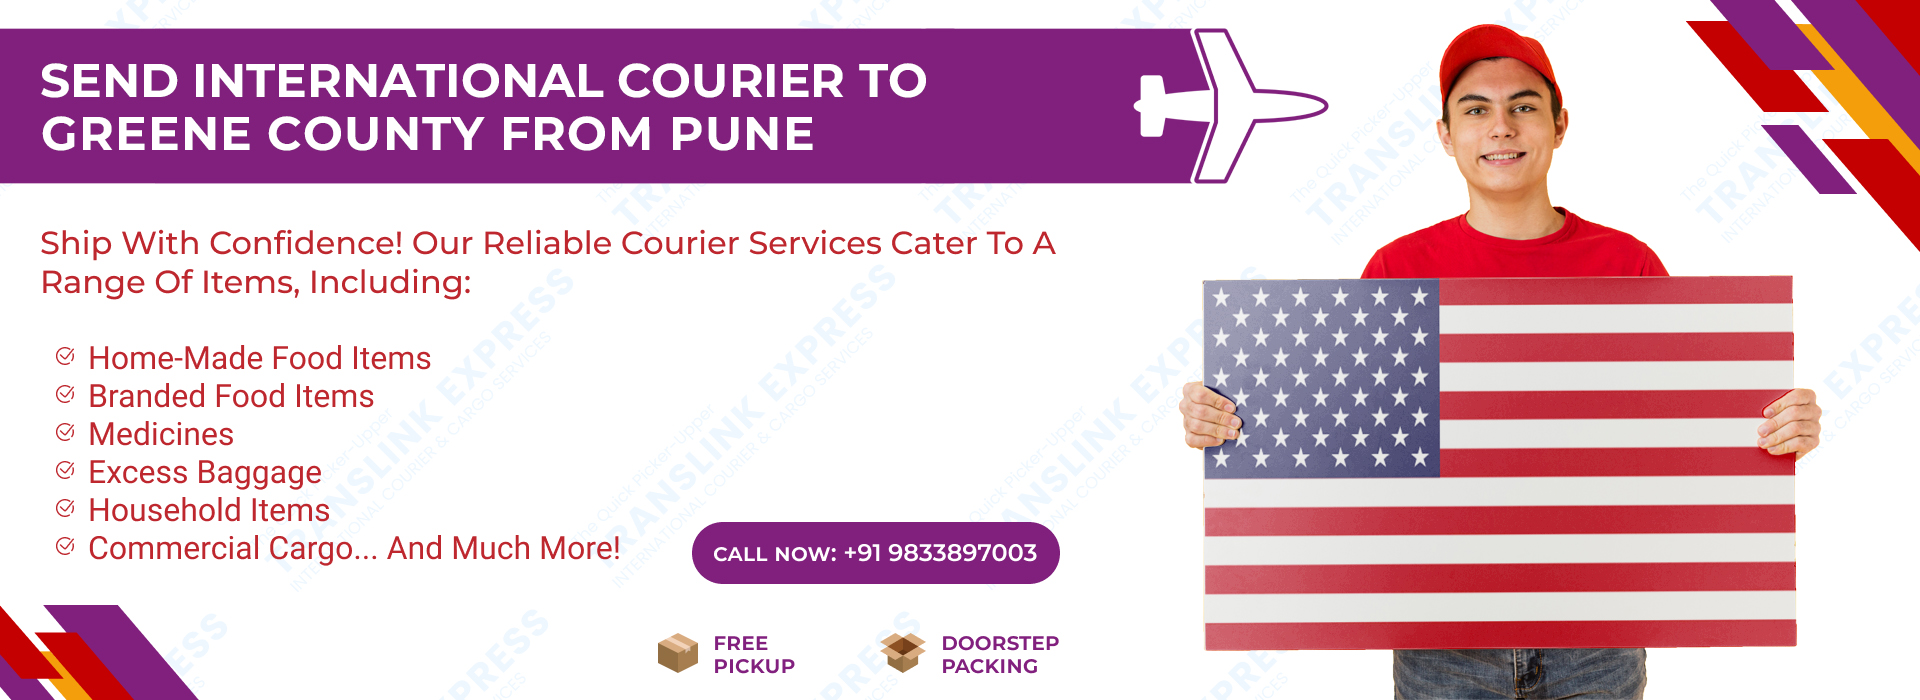 Courier to Greene County From Pune